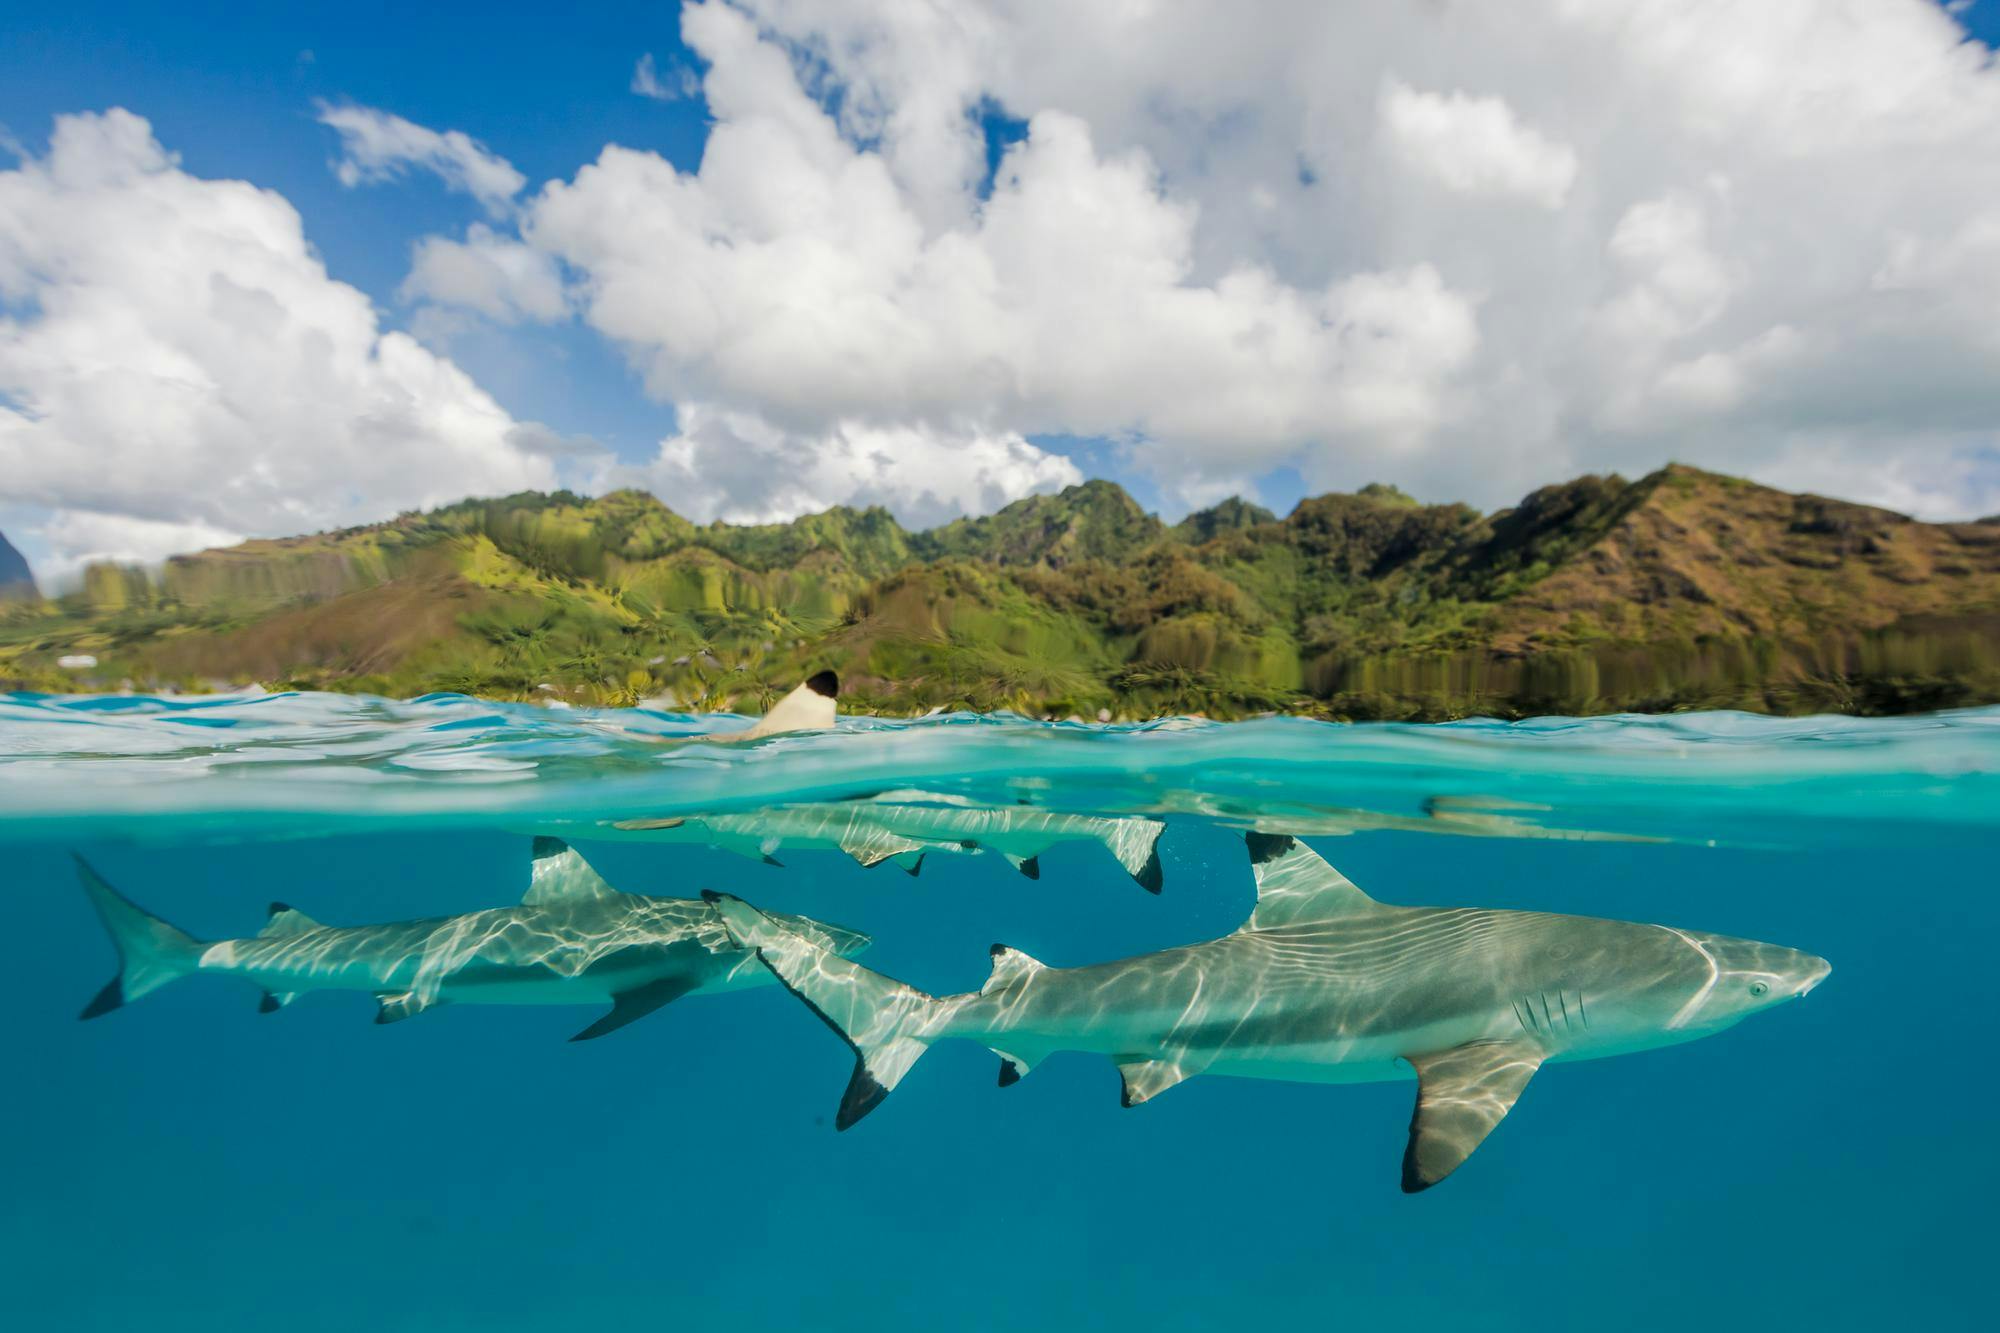 A school of Black Tip Reef Sharks, not considered dangerous to people, photographed while snorkeling at Moorea, Society Islands, French Polynesia.